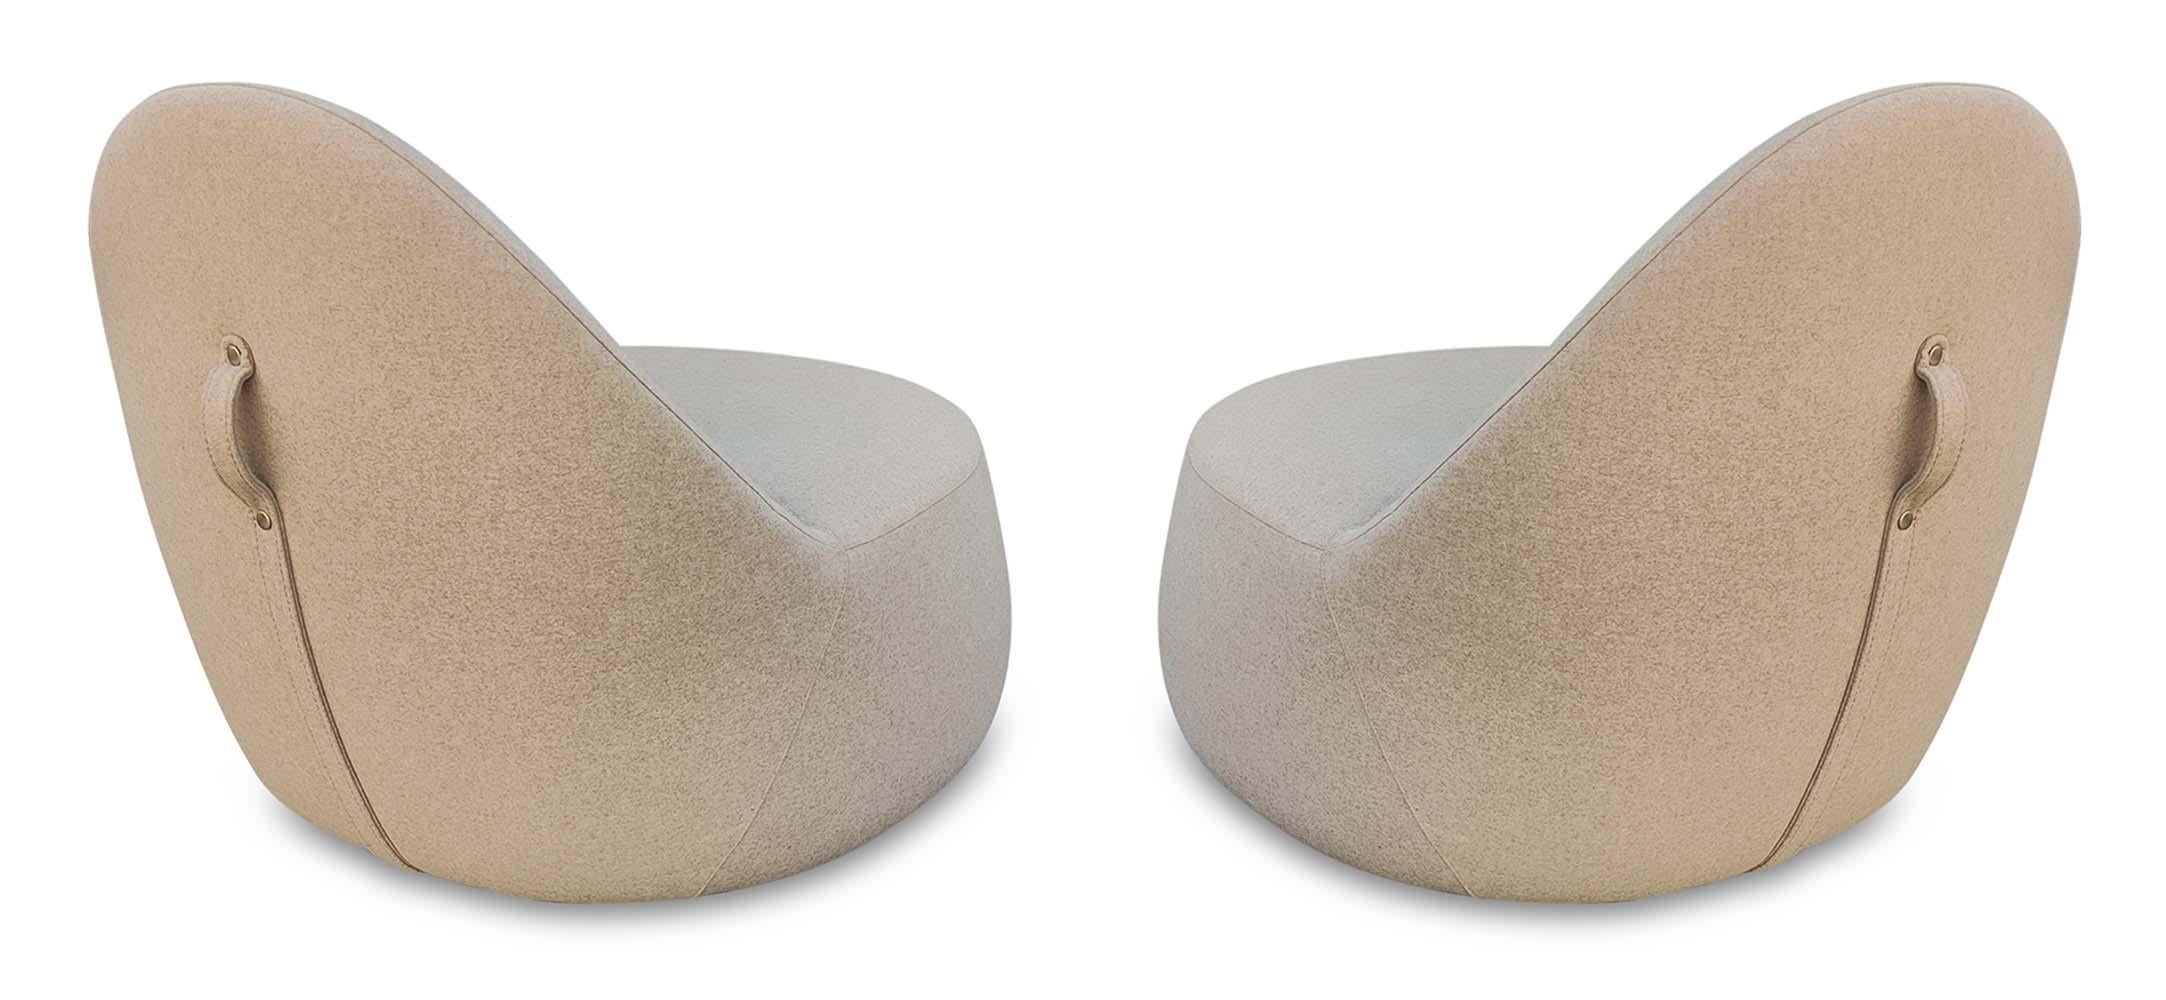 This pair of elegant and space-age chairs was designed by Claudia and Harry Washington for production by Bernhardt Design. They are dressed in a sand color, and feature a strap on the back for increased handleability. The strap runs down the back of